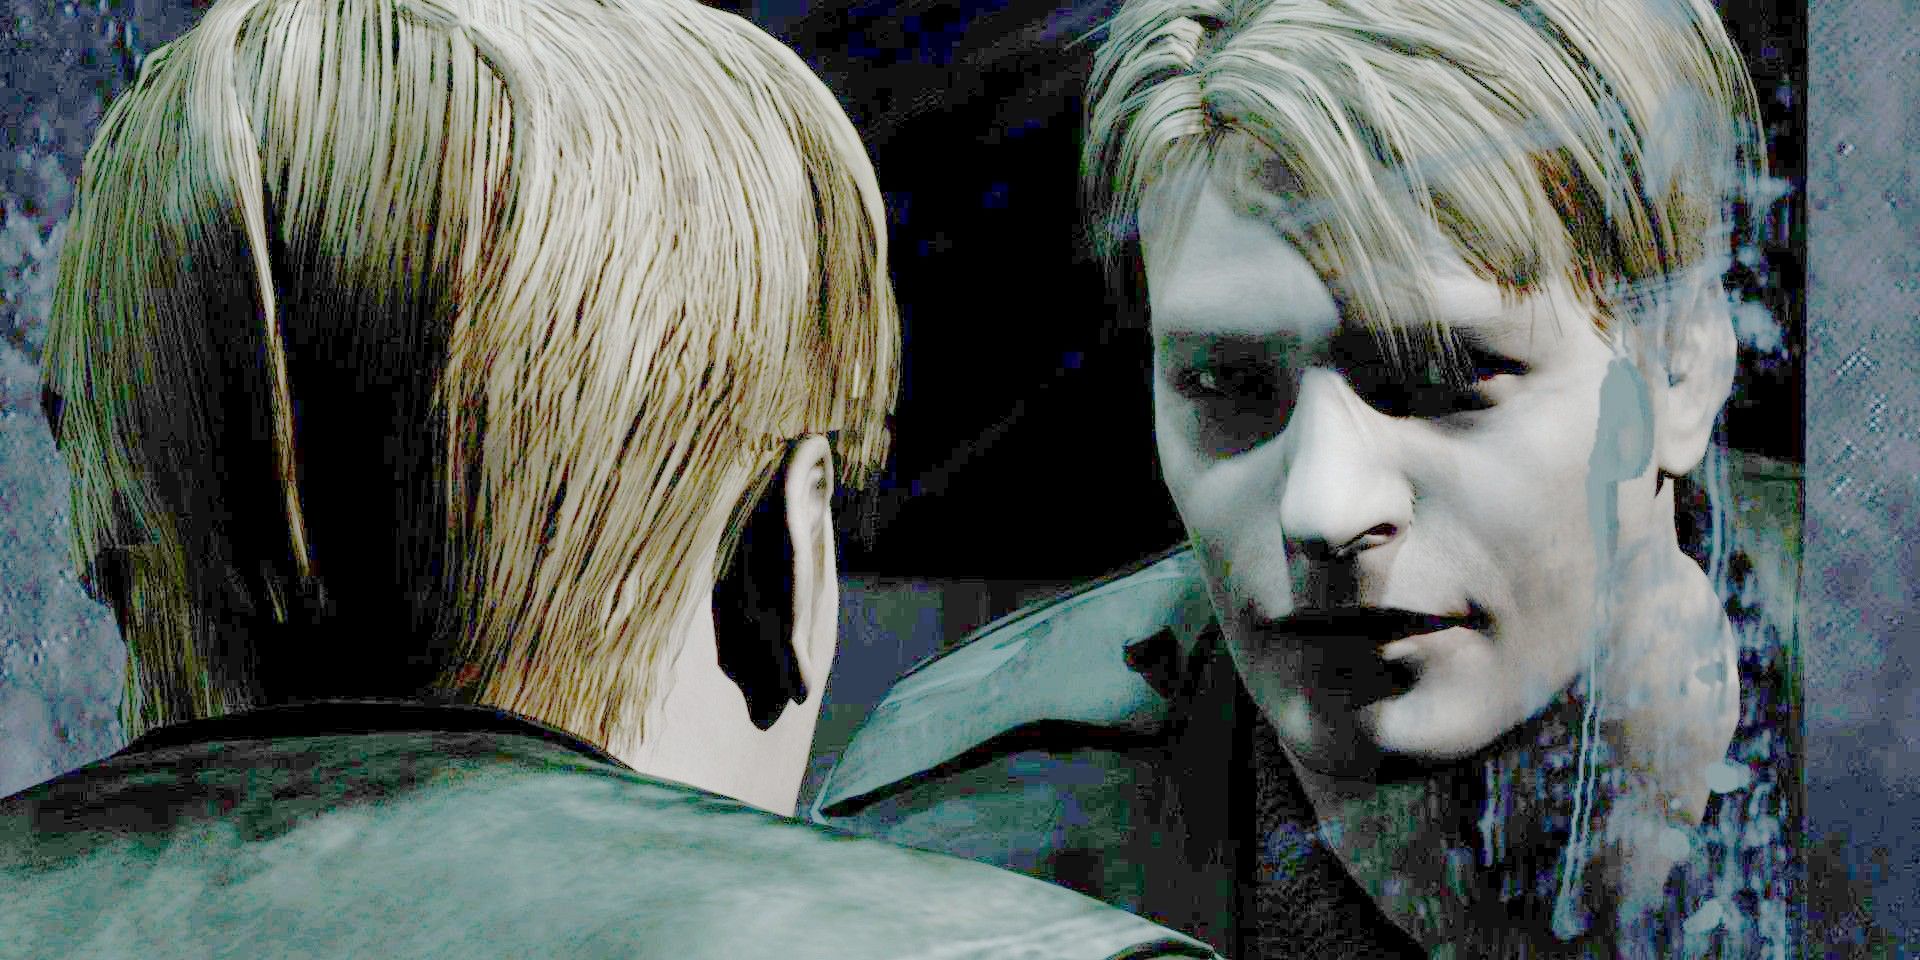 James staring at the player in Silent Hill 2.